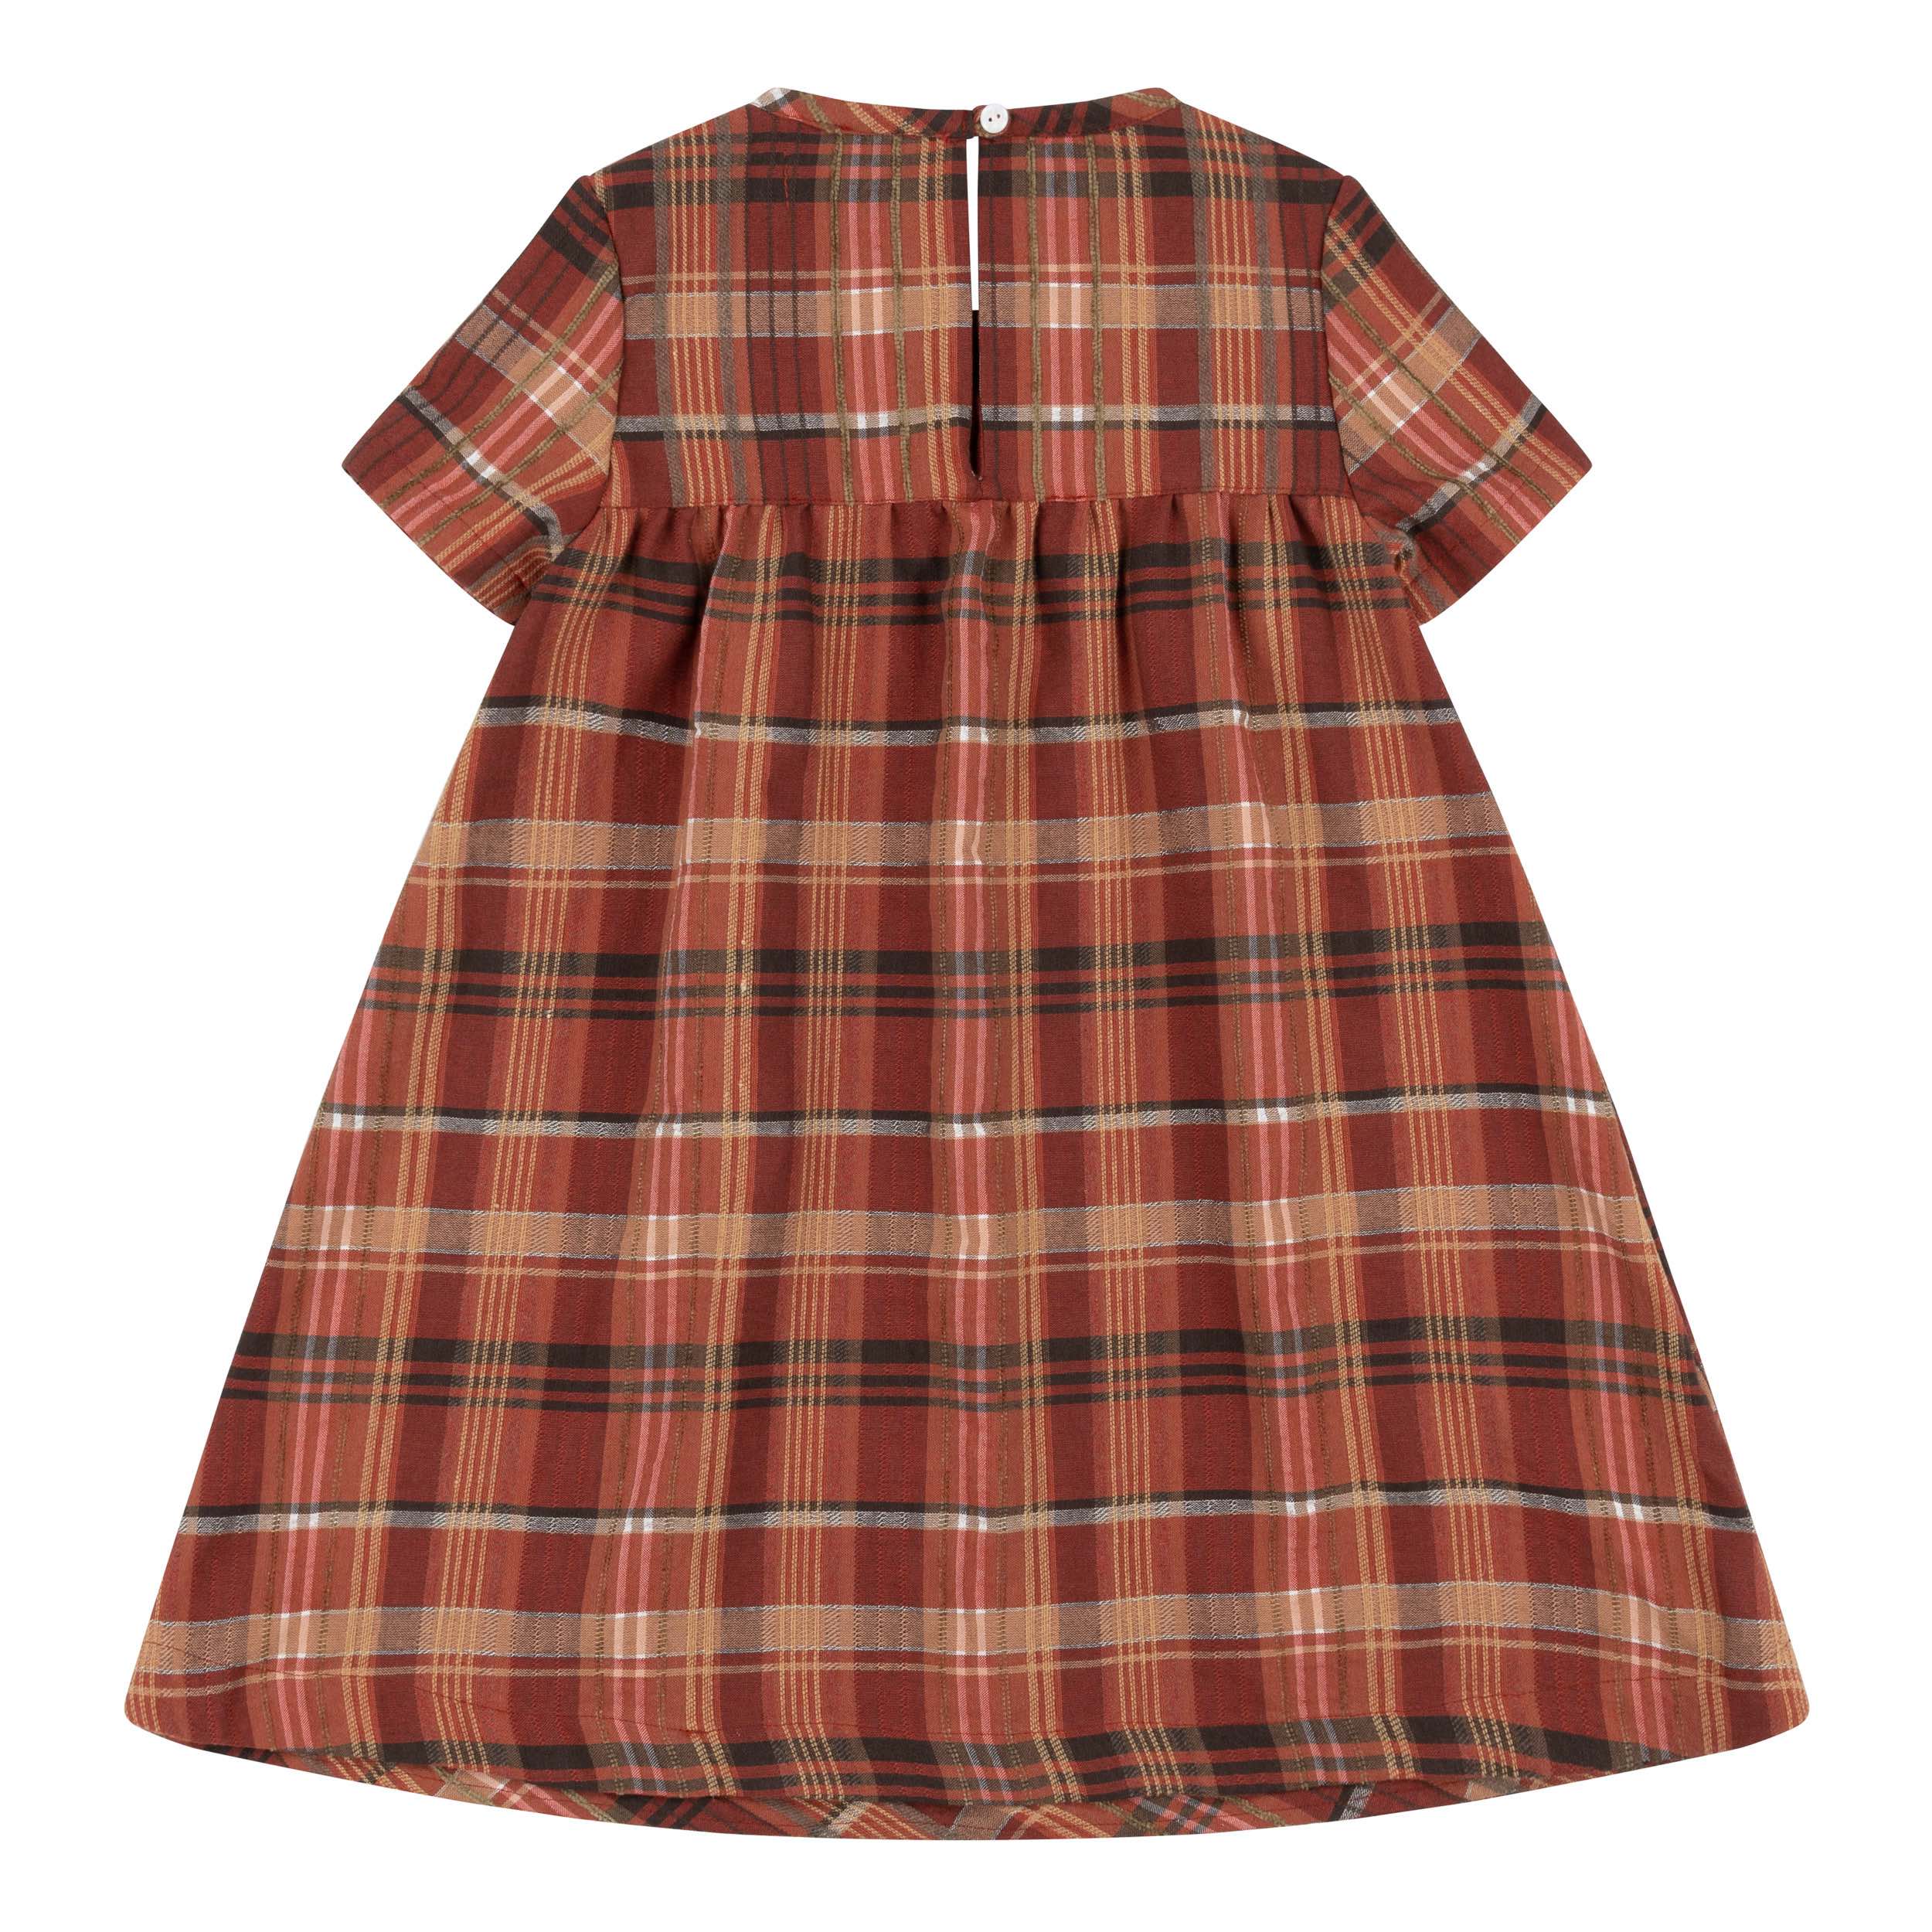 Carrier Company Children's Smock Dress in Rust Check